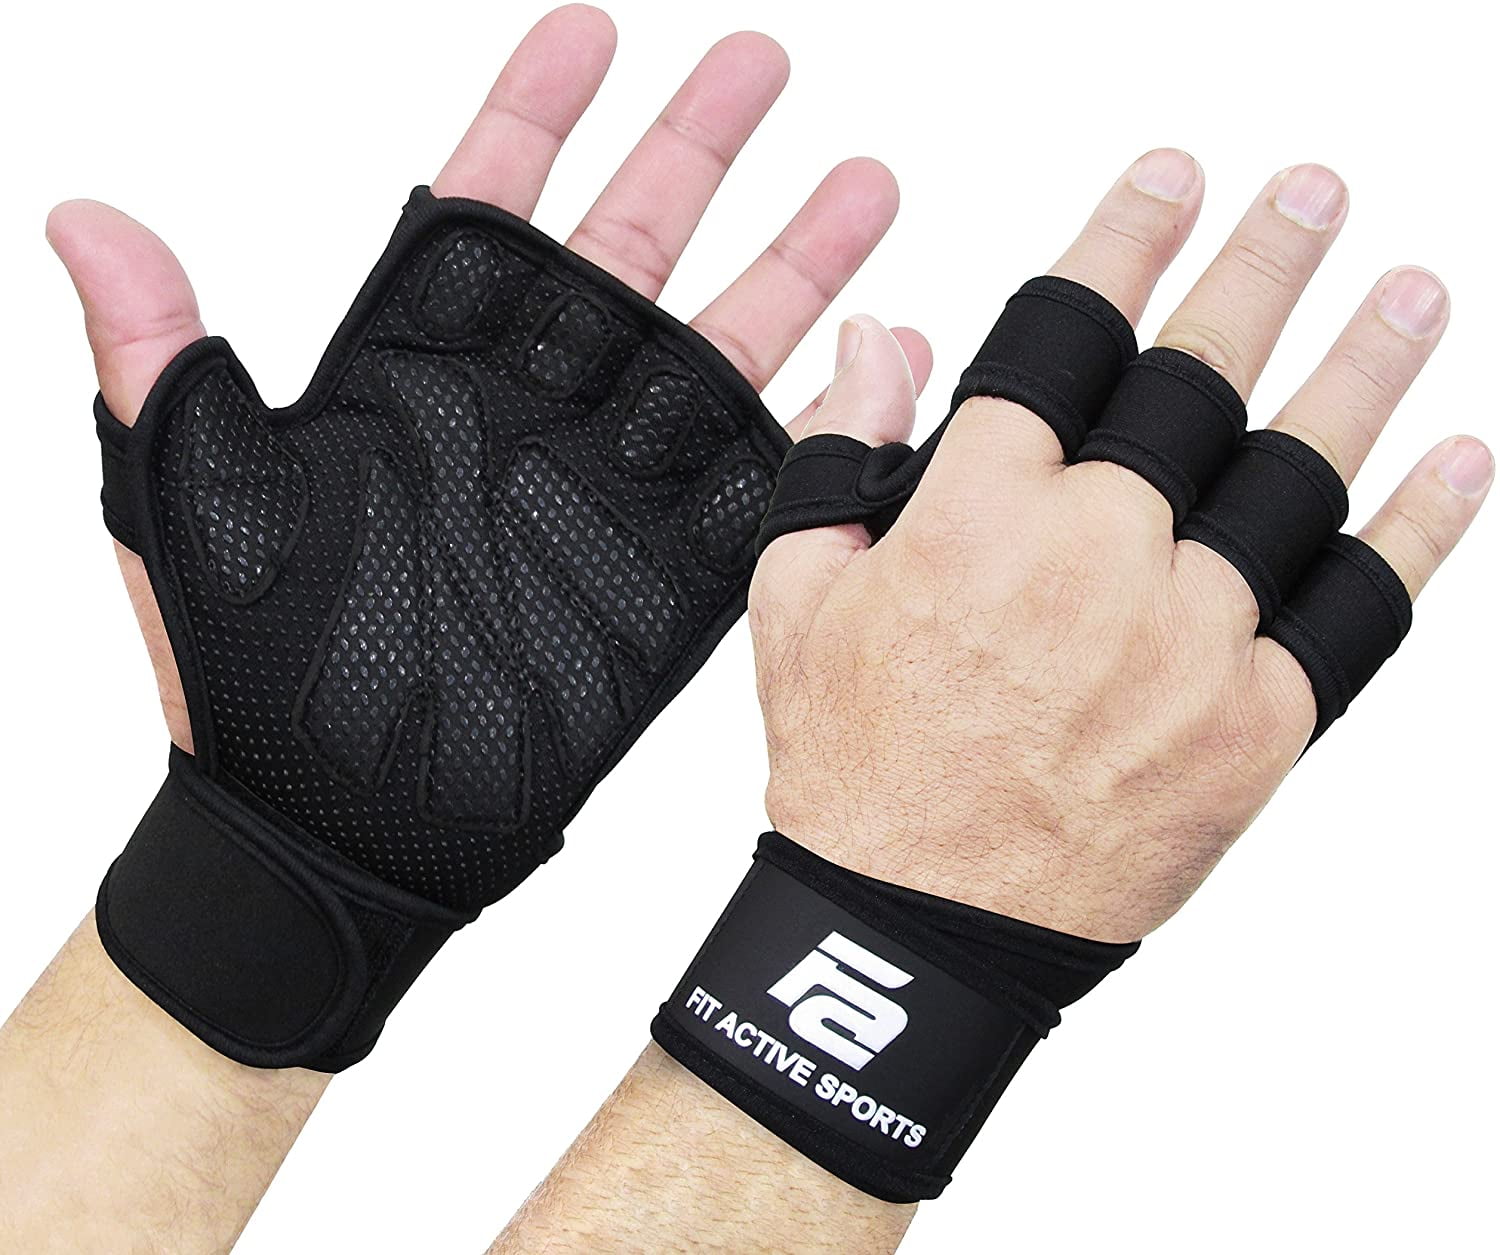 Wods Gym Cross Training Crossfit Suits Men & Women Use for Workout Weightlifting Fit Active Sports Gymnastics Grips 3 Hole Weight Lifting Gloves 